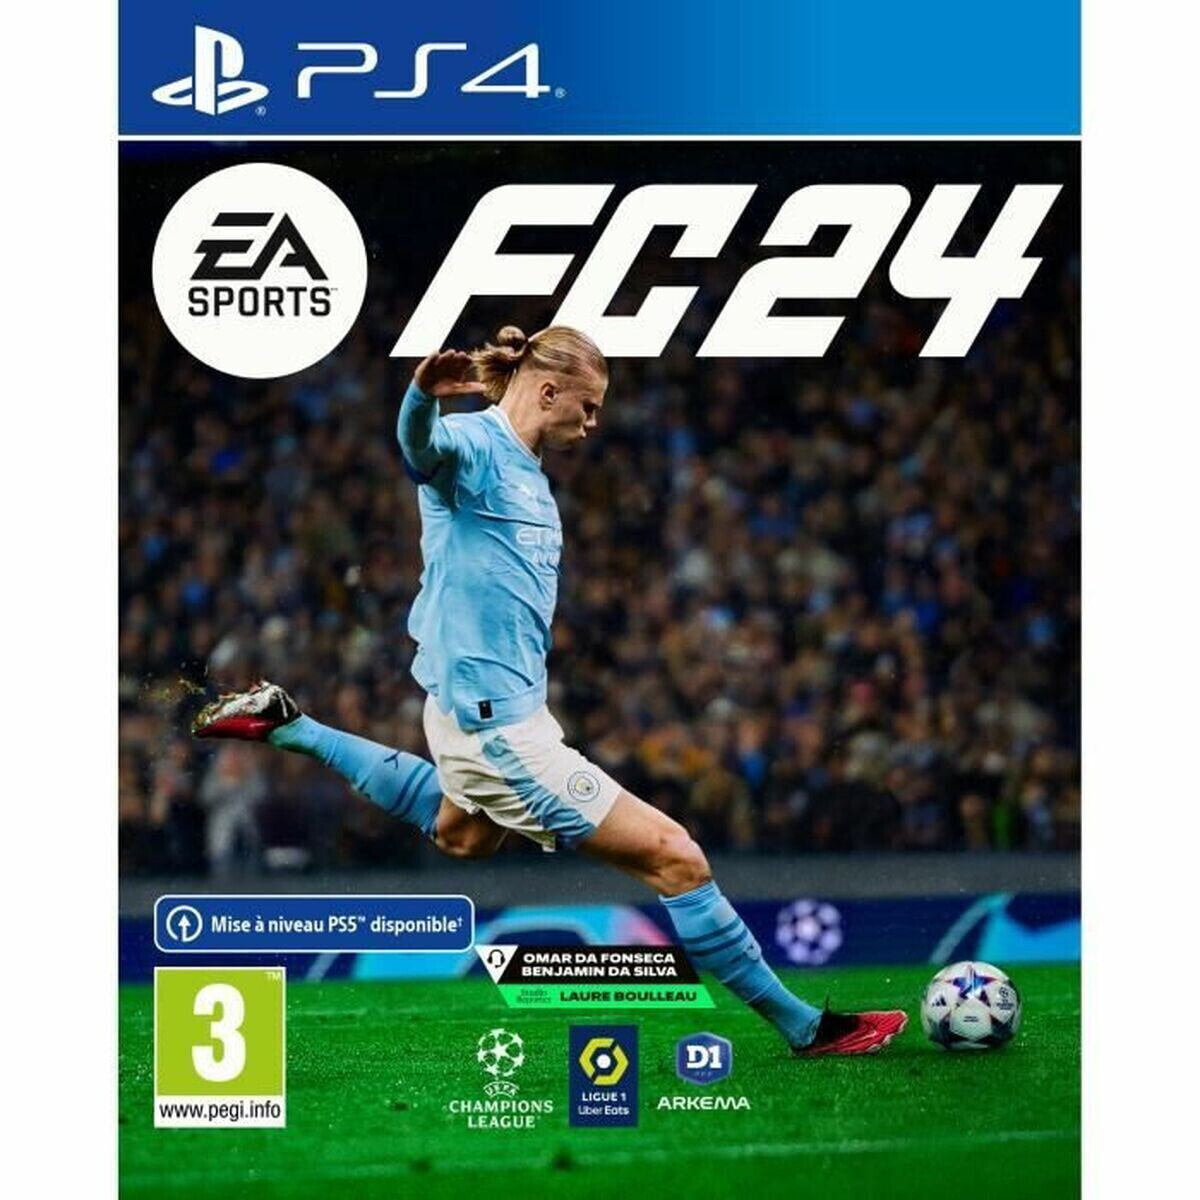 PlayStation 4 Video Game Electronic Arts FC 24